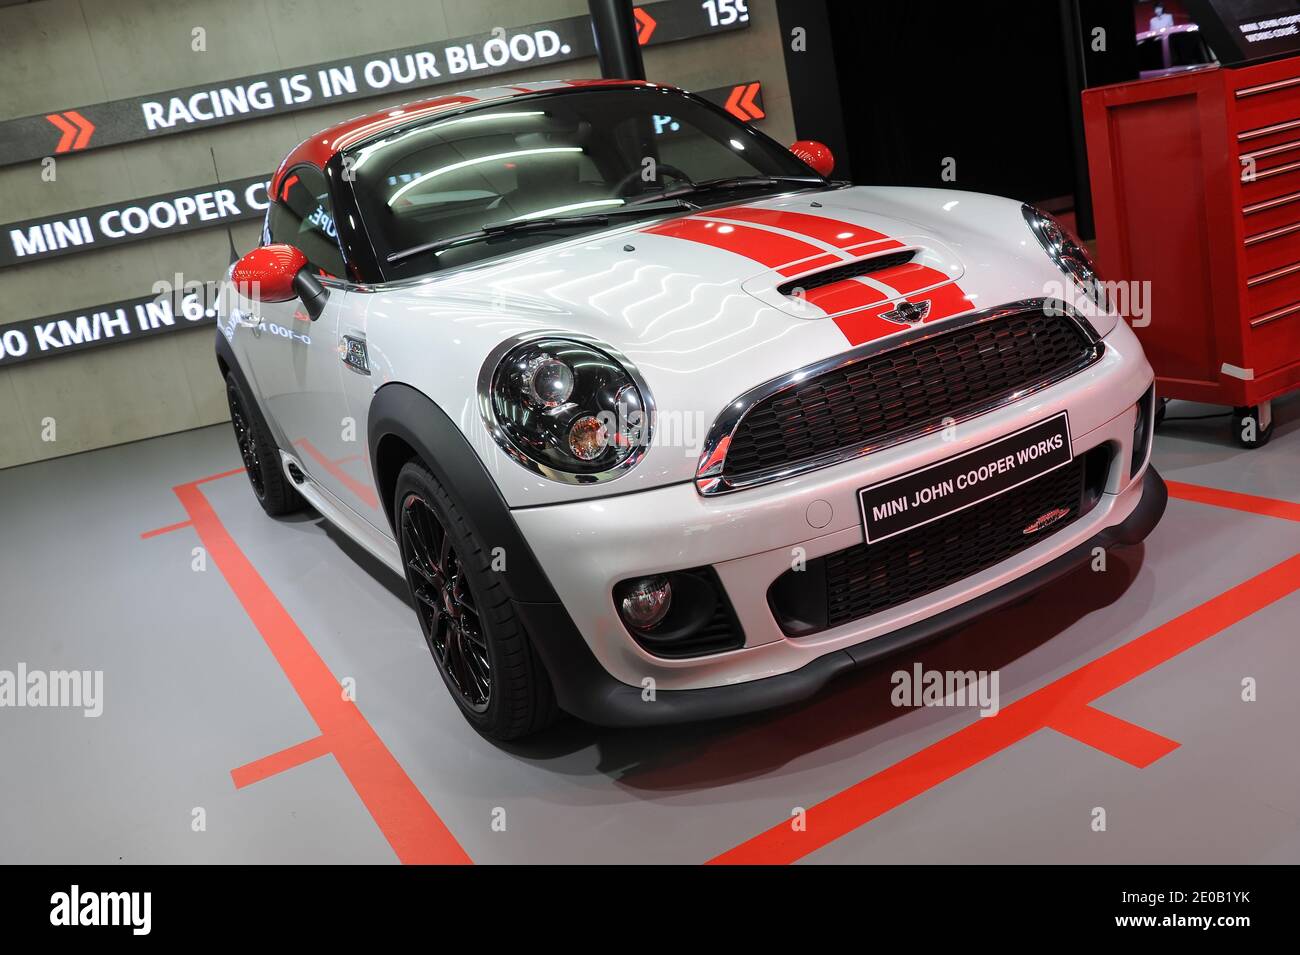 Mini John Cooper Works on display at the 82nd International Motor Show and  Accessories of Geneva, Switzerland on March 7, 2012. Photo by  Loona/ABACAPRESS.COM Stock Photo - Alamy